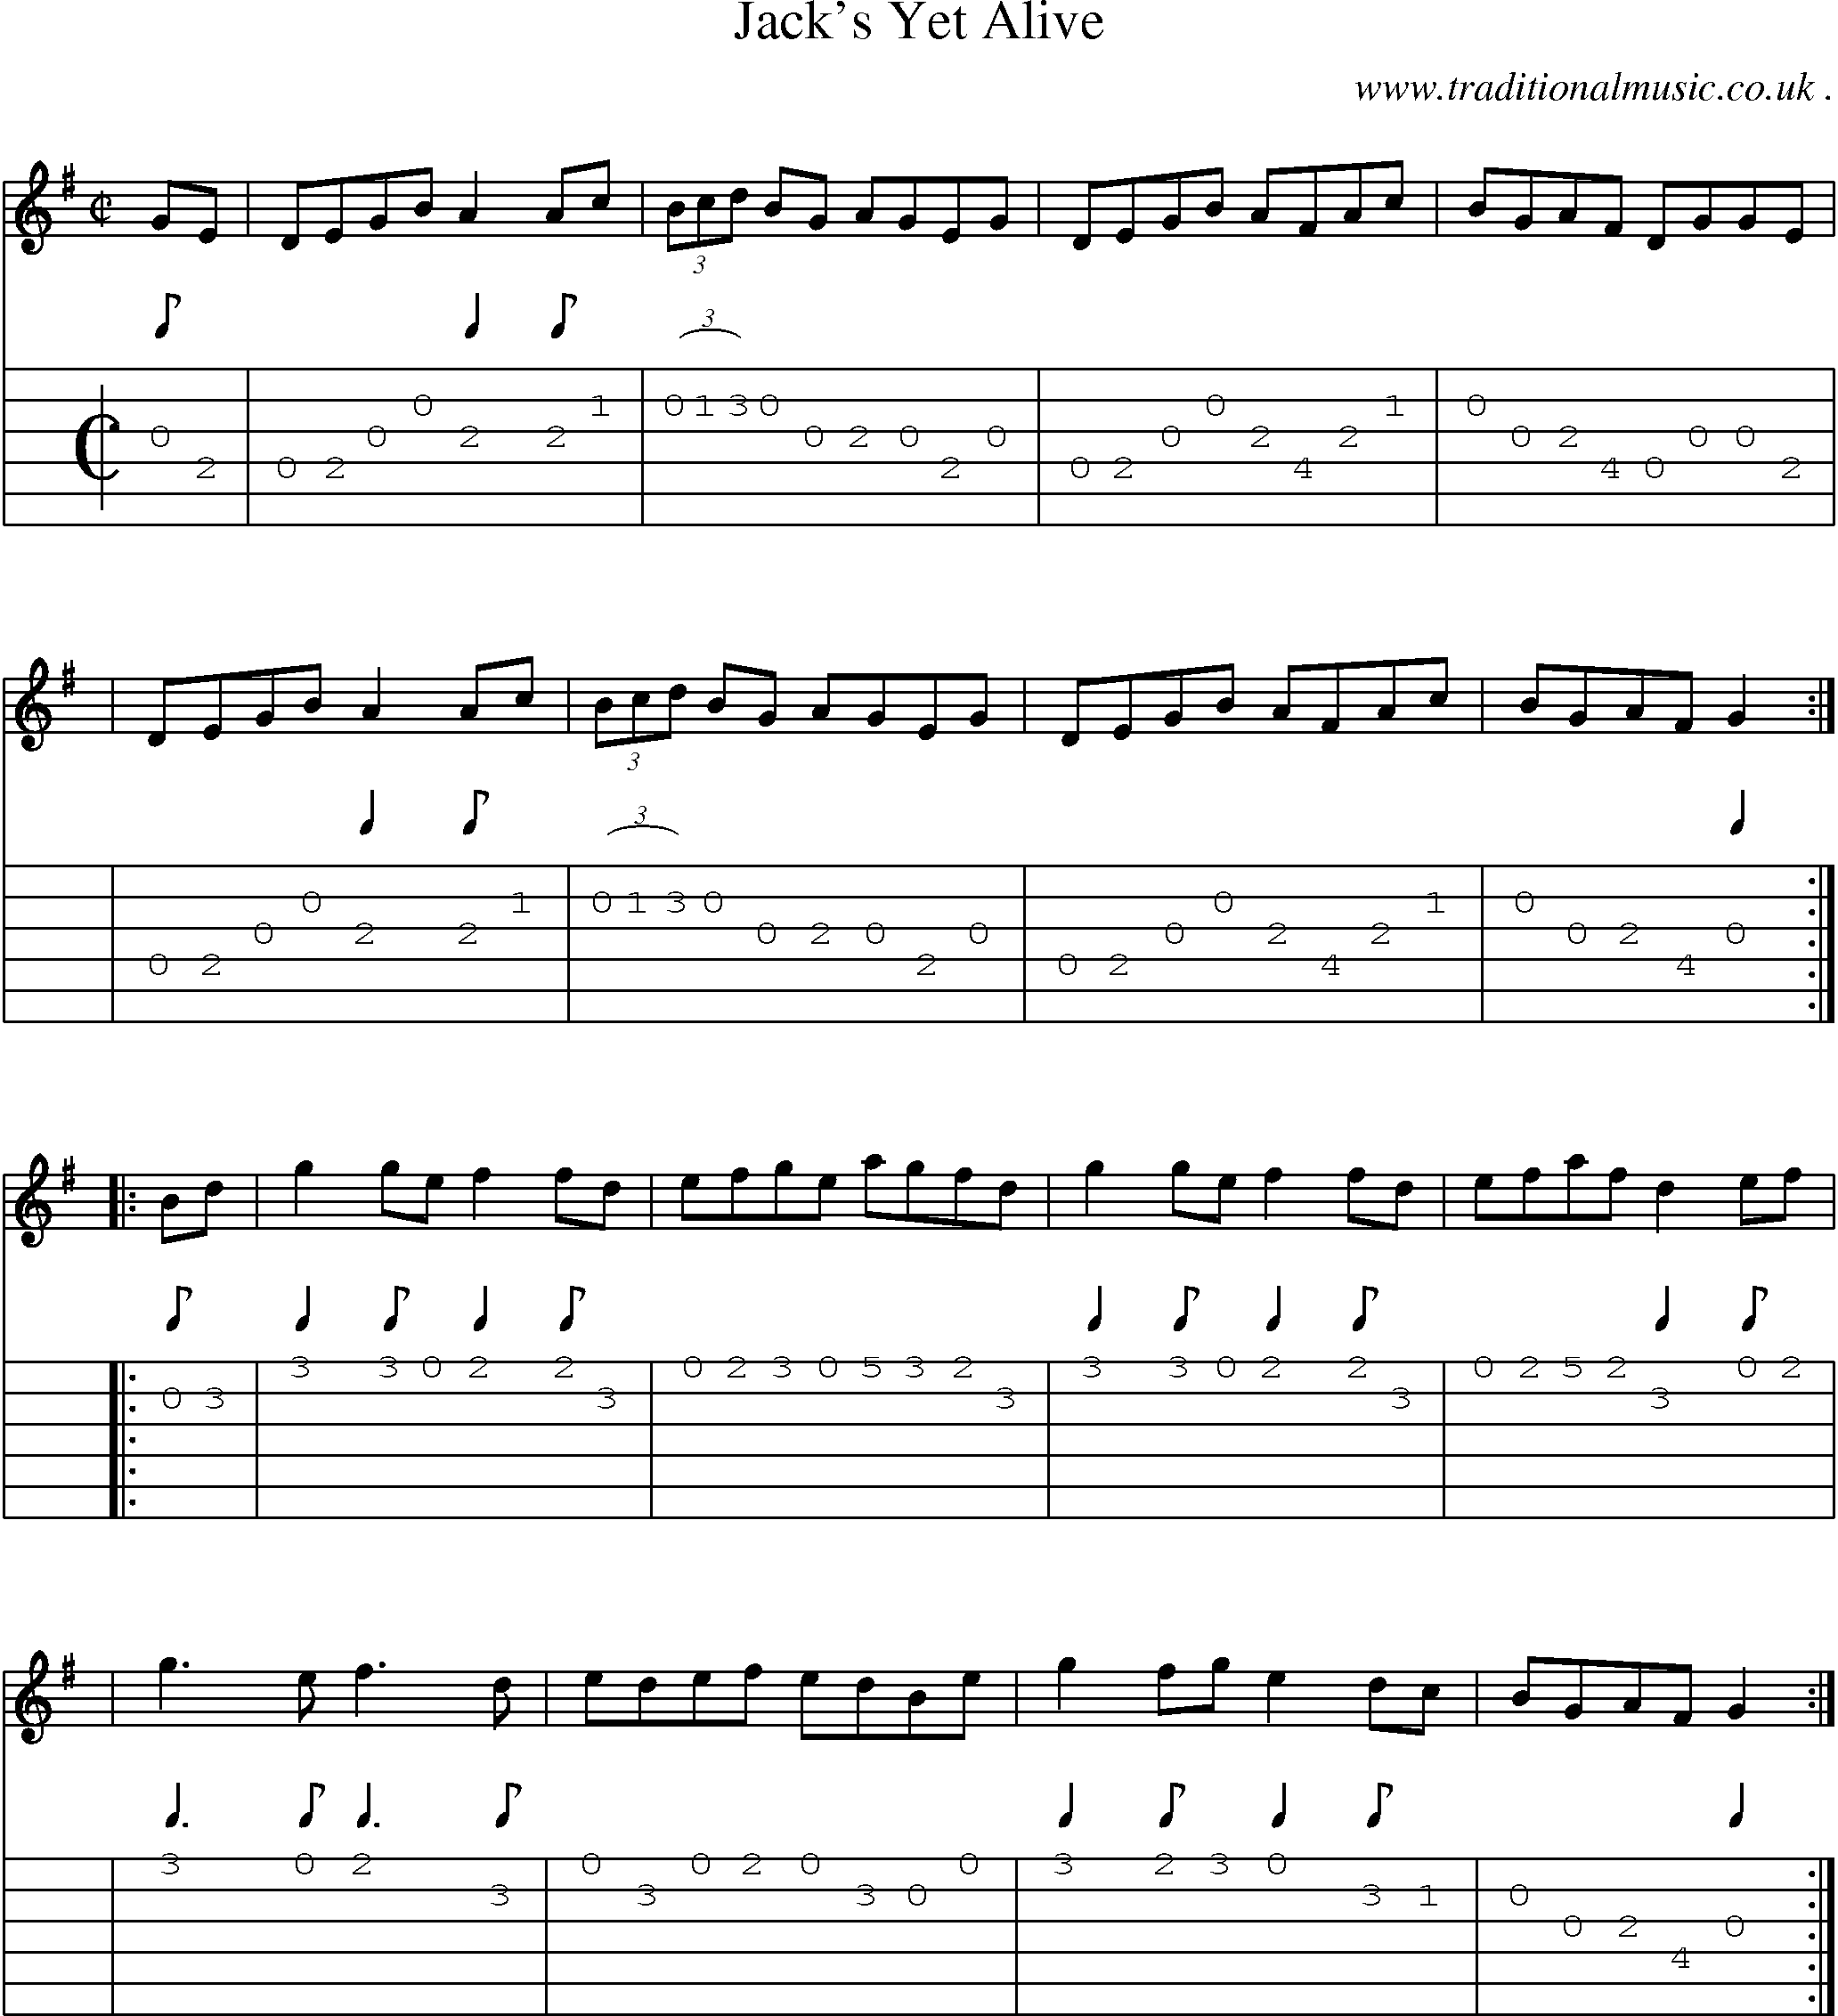 Sheet-music  score, Chords and Guitar Tabs for Jacks Yet Alive